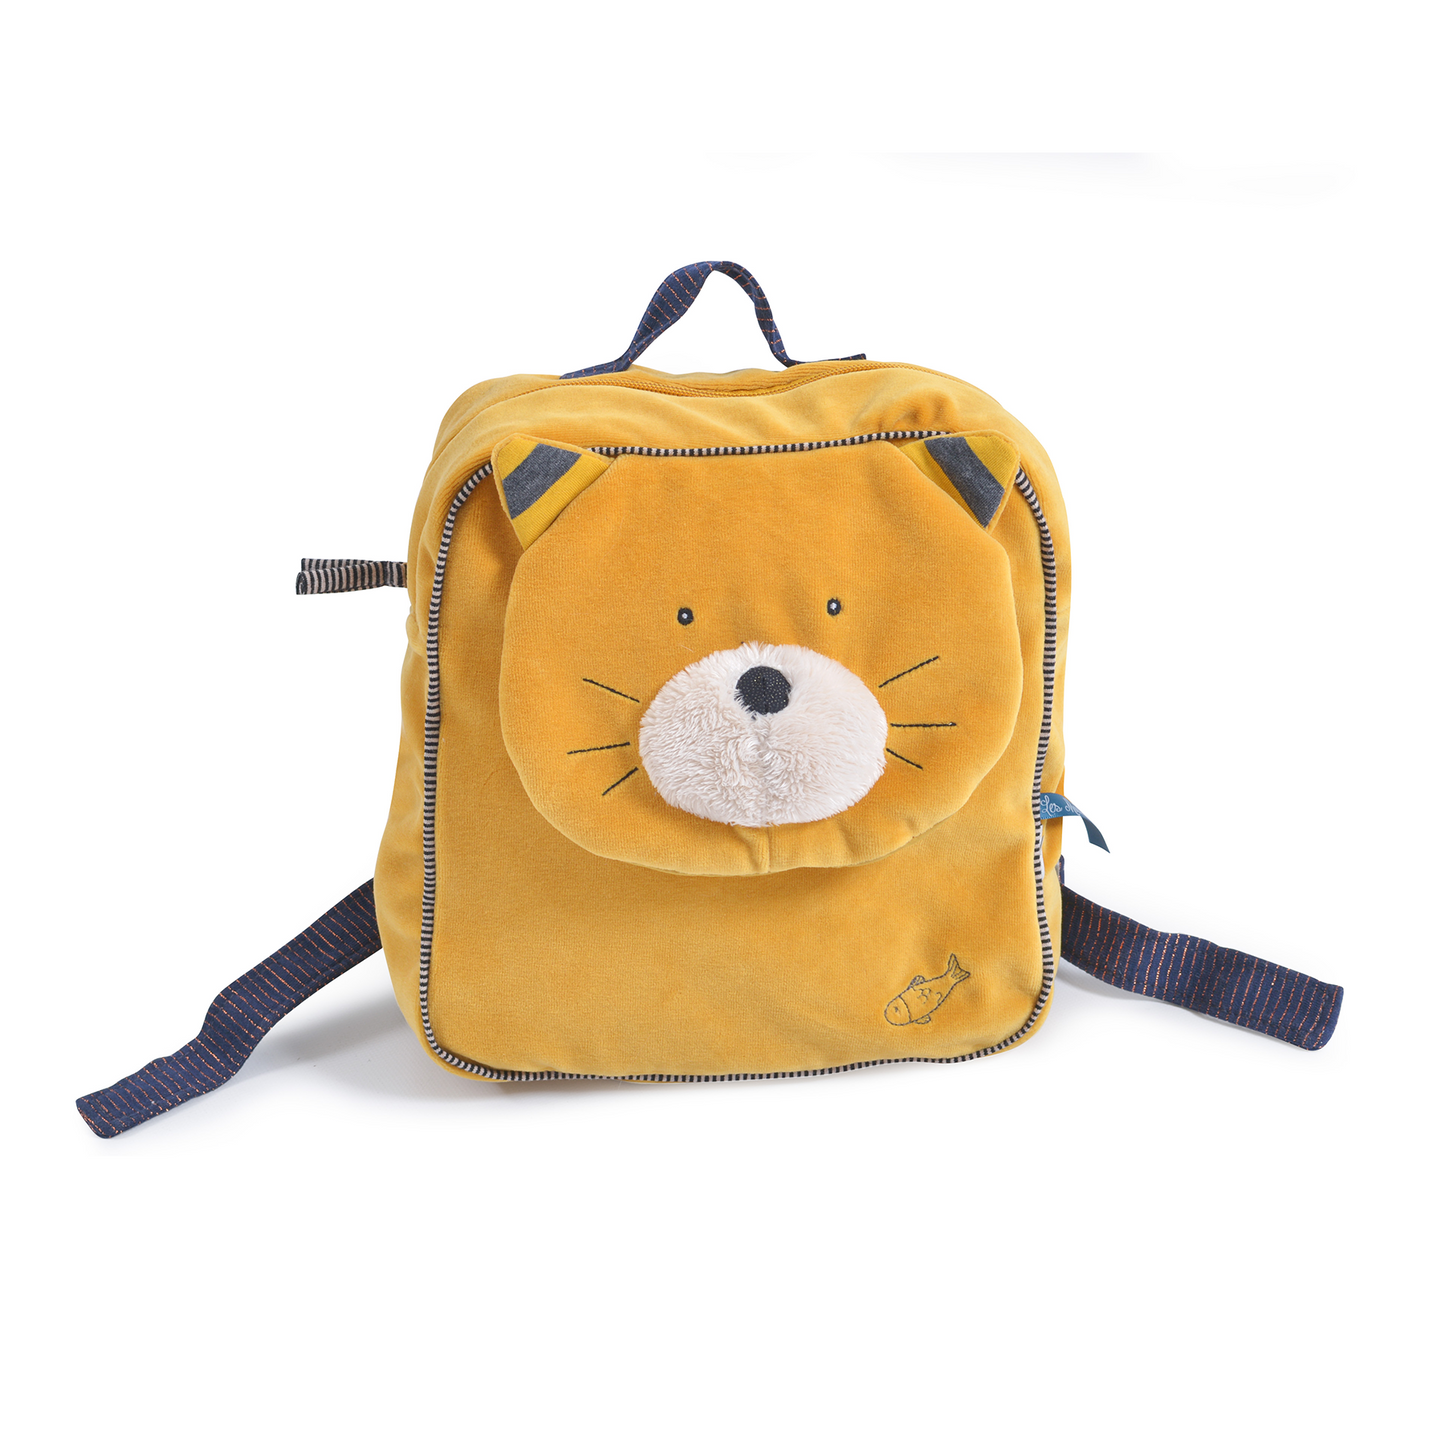 This cute mustard yellow cat backpack is perfect for transporting little things! The backpack has large glitter eyes, elasticated closure and flap, adjustable straps.